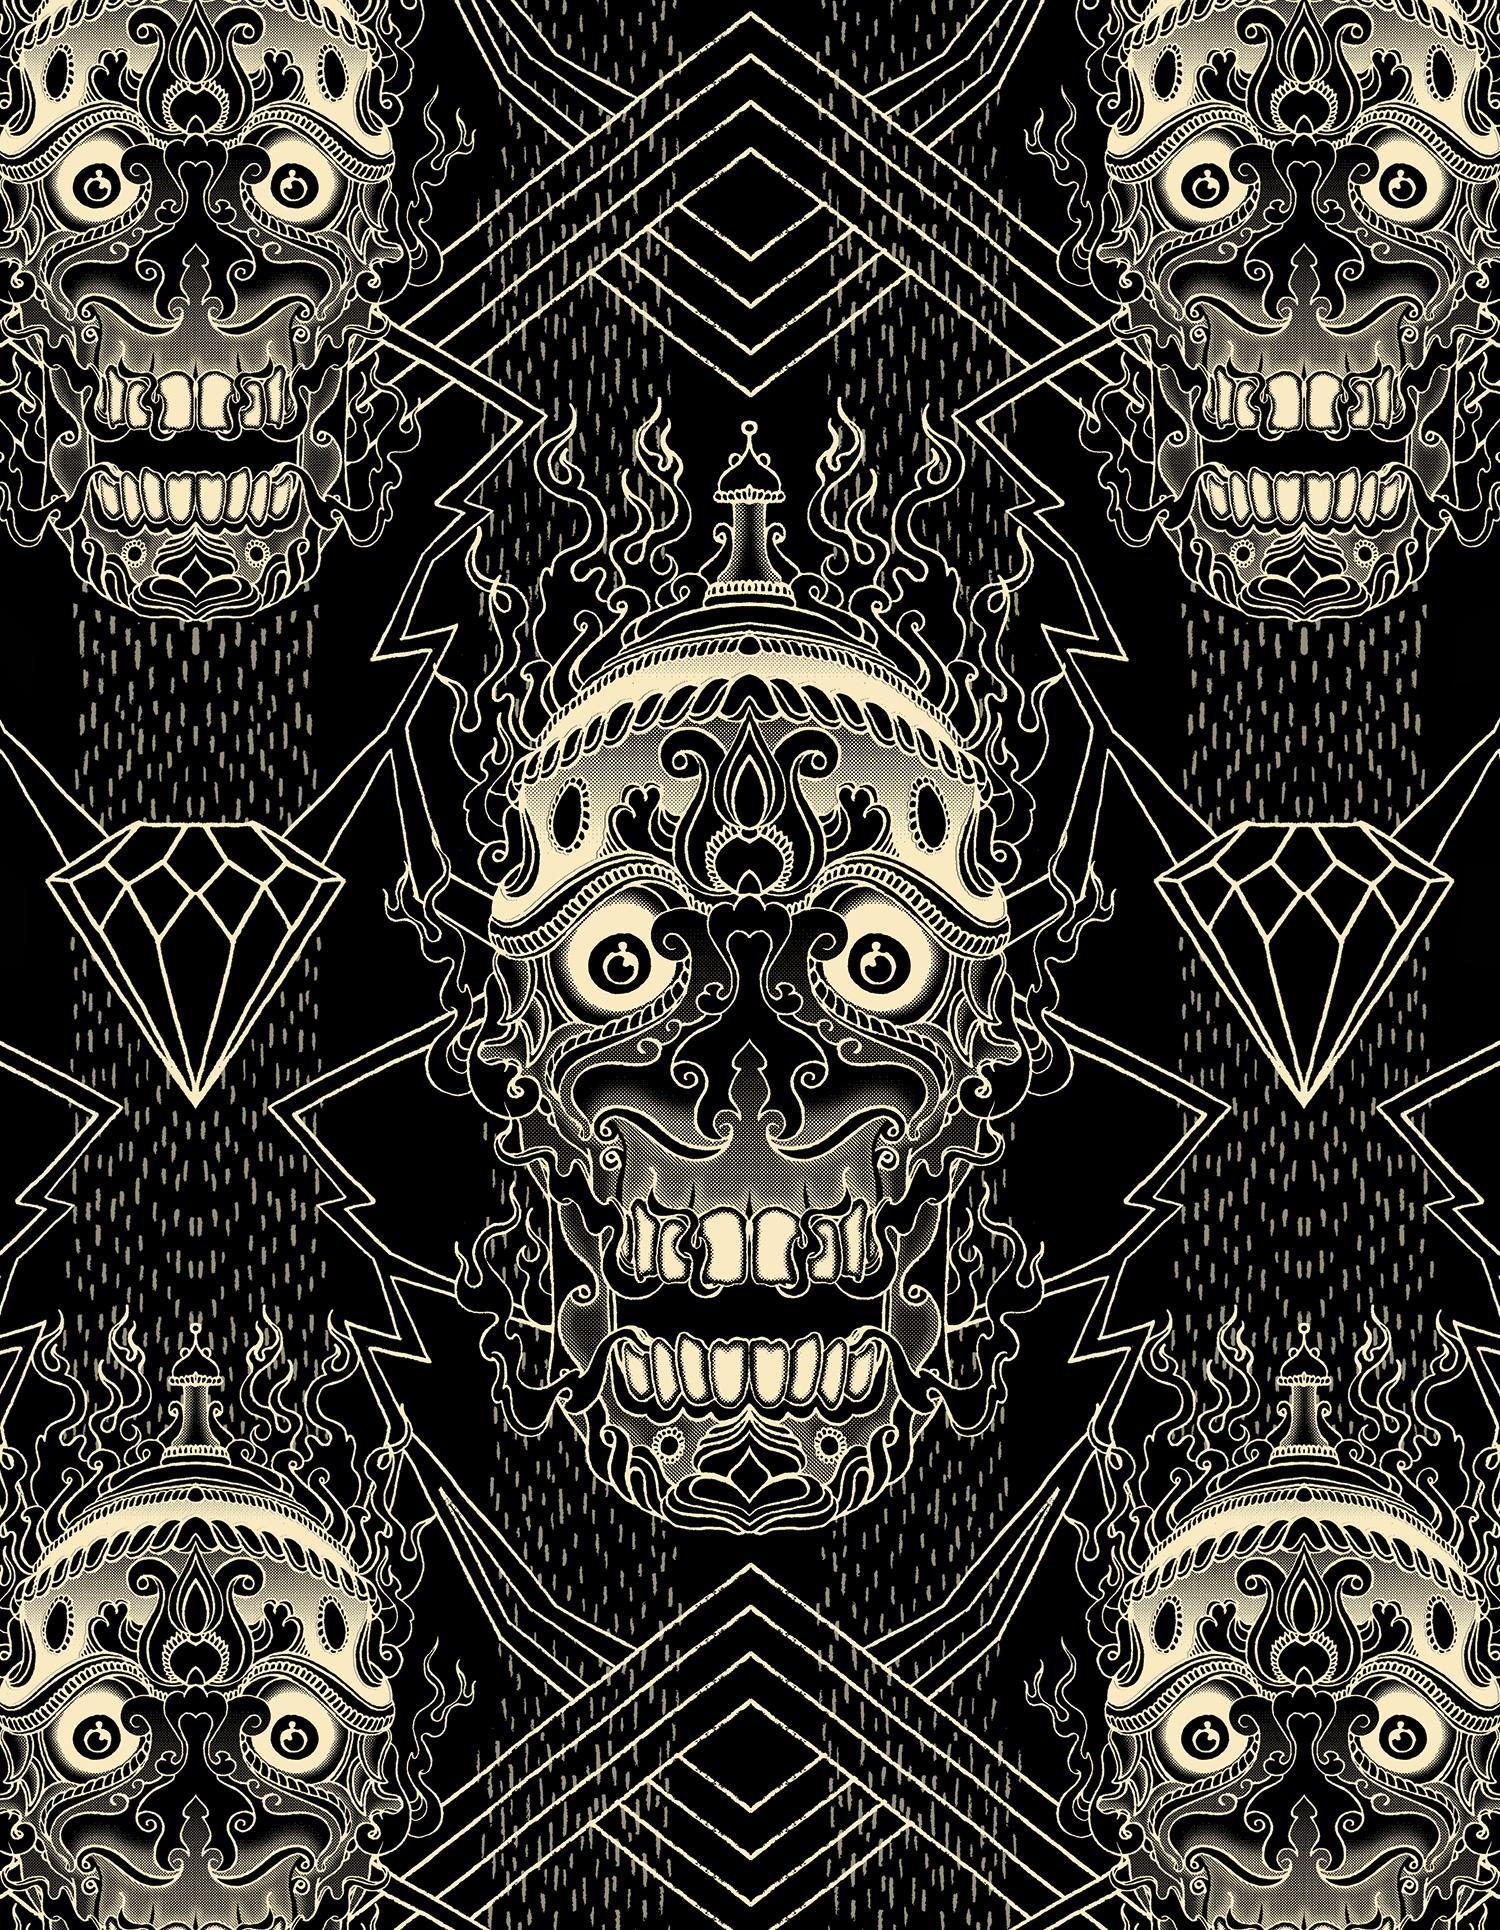 Photoshop Tutorial: Design A Decorative Skull Themed Repeating